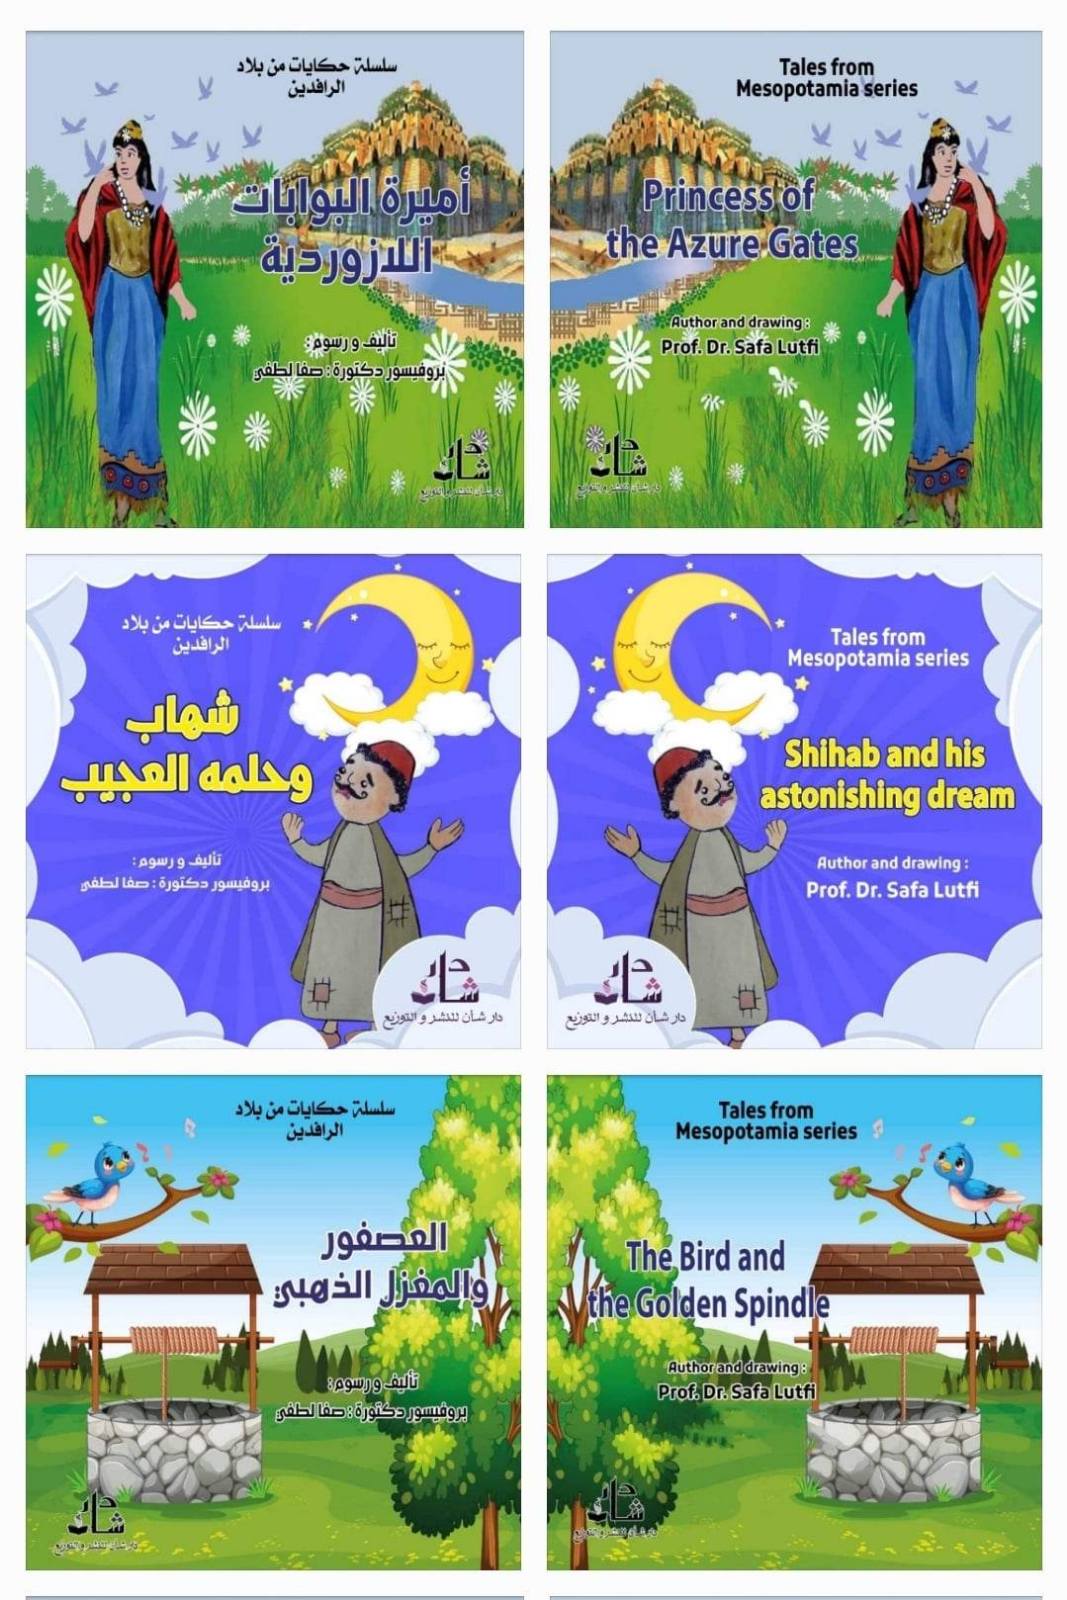  Recently published by Prof. Dr. Safa Lutfi for Dar Shan for publishing and distribution in the sisterly Hashemite Kingdom of Jordan  A series of stories written and illustrated by her, addressed to children, entitled (Tales from Mesopotamia series)